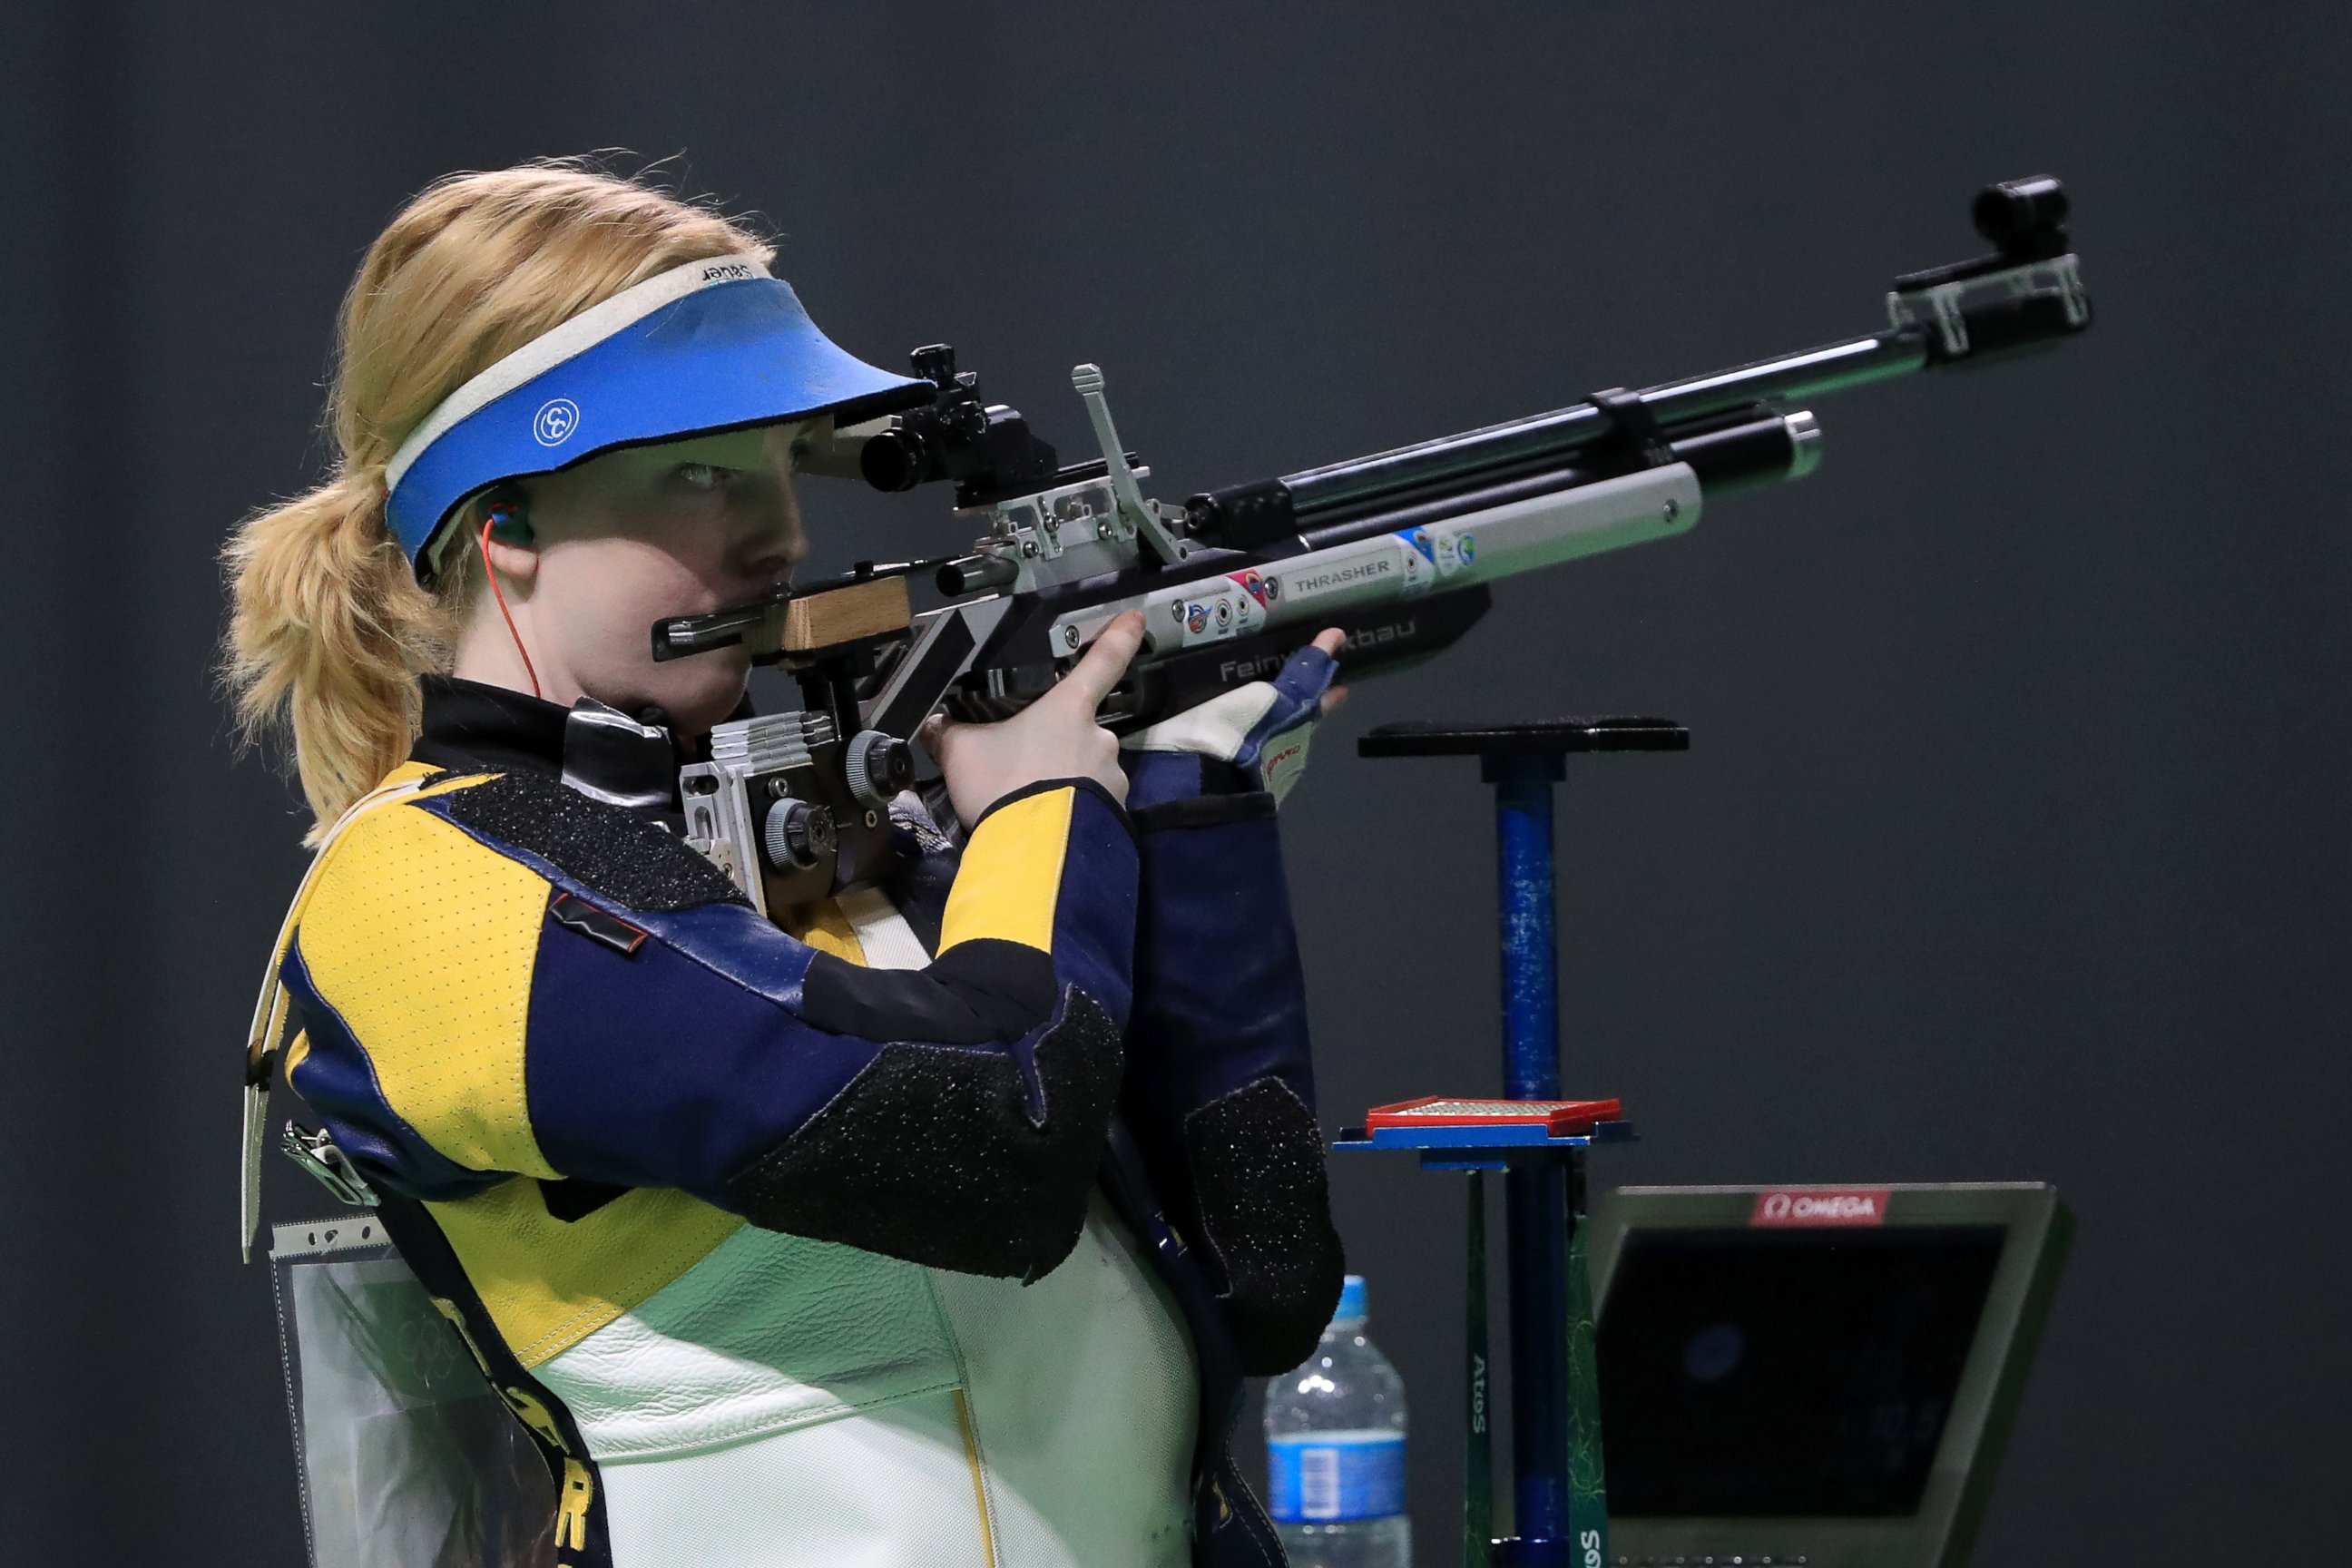 PHOTO: Ginny Thrasher of the United States competes in the 10m Air Rifle Women's Finals on Day 1 of the Rio 2016 Olympic Games at the Olympic Shooting Centre on Aug. 6, 2016 in Rio de Janeiro. 